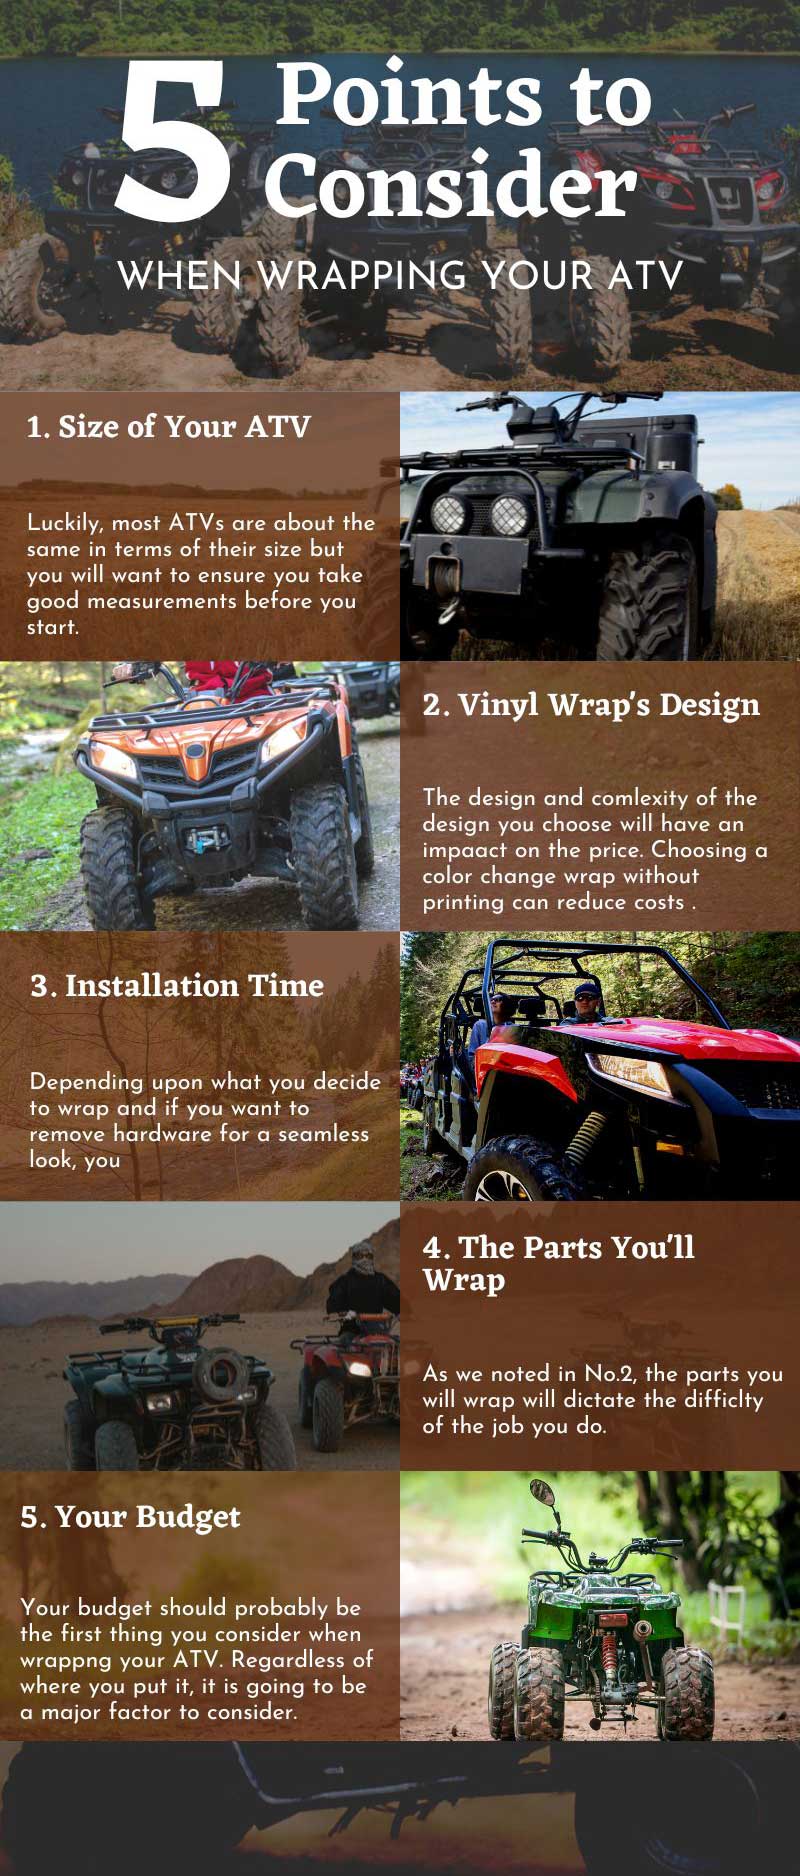 5 Points to Consider for Your ATV Wrap